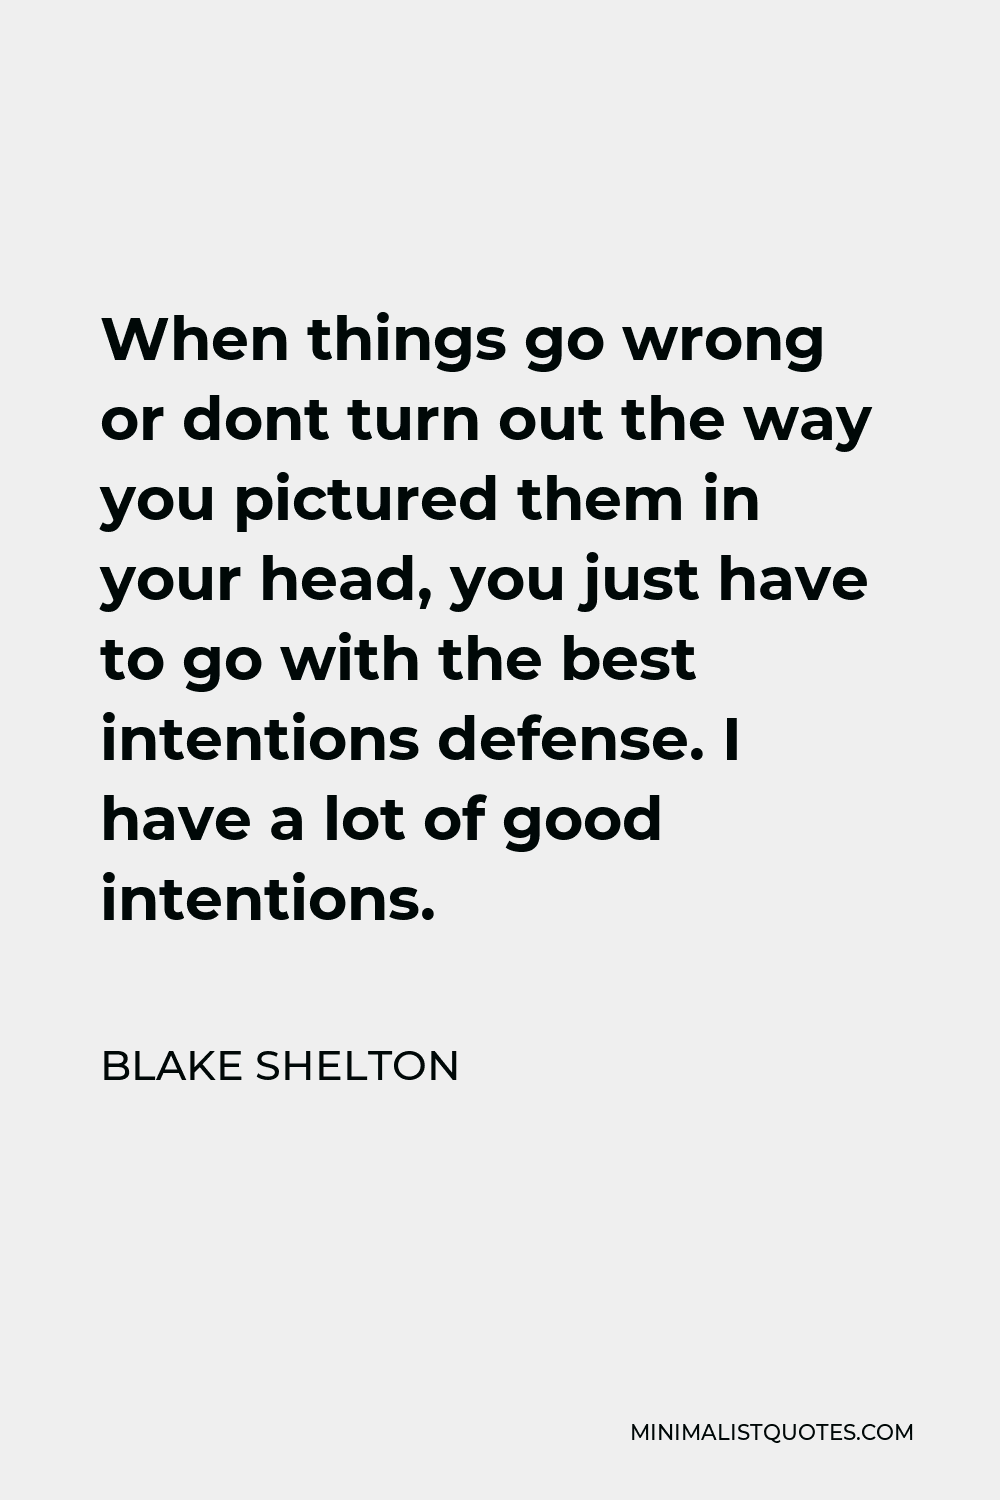 Blake Shelton Quote - When things go wrong or dont turn out the way you pictured them in your head, you just have to go with the best intentions defense. I have a lot of good intentions.